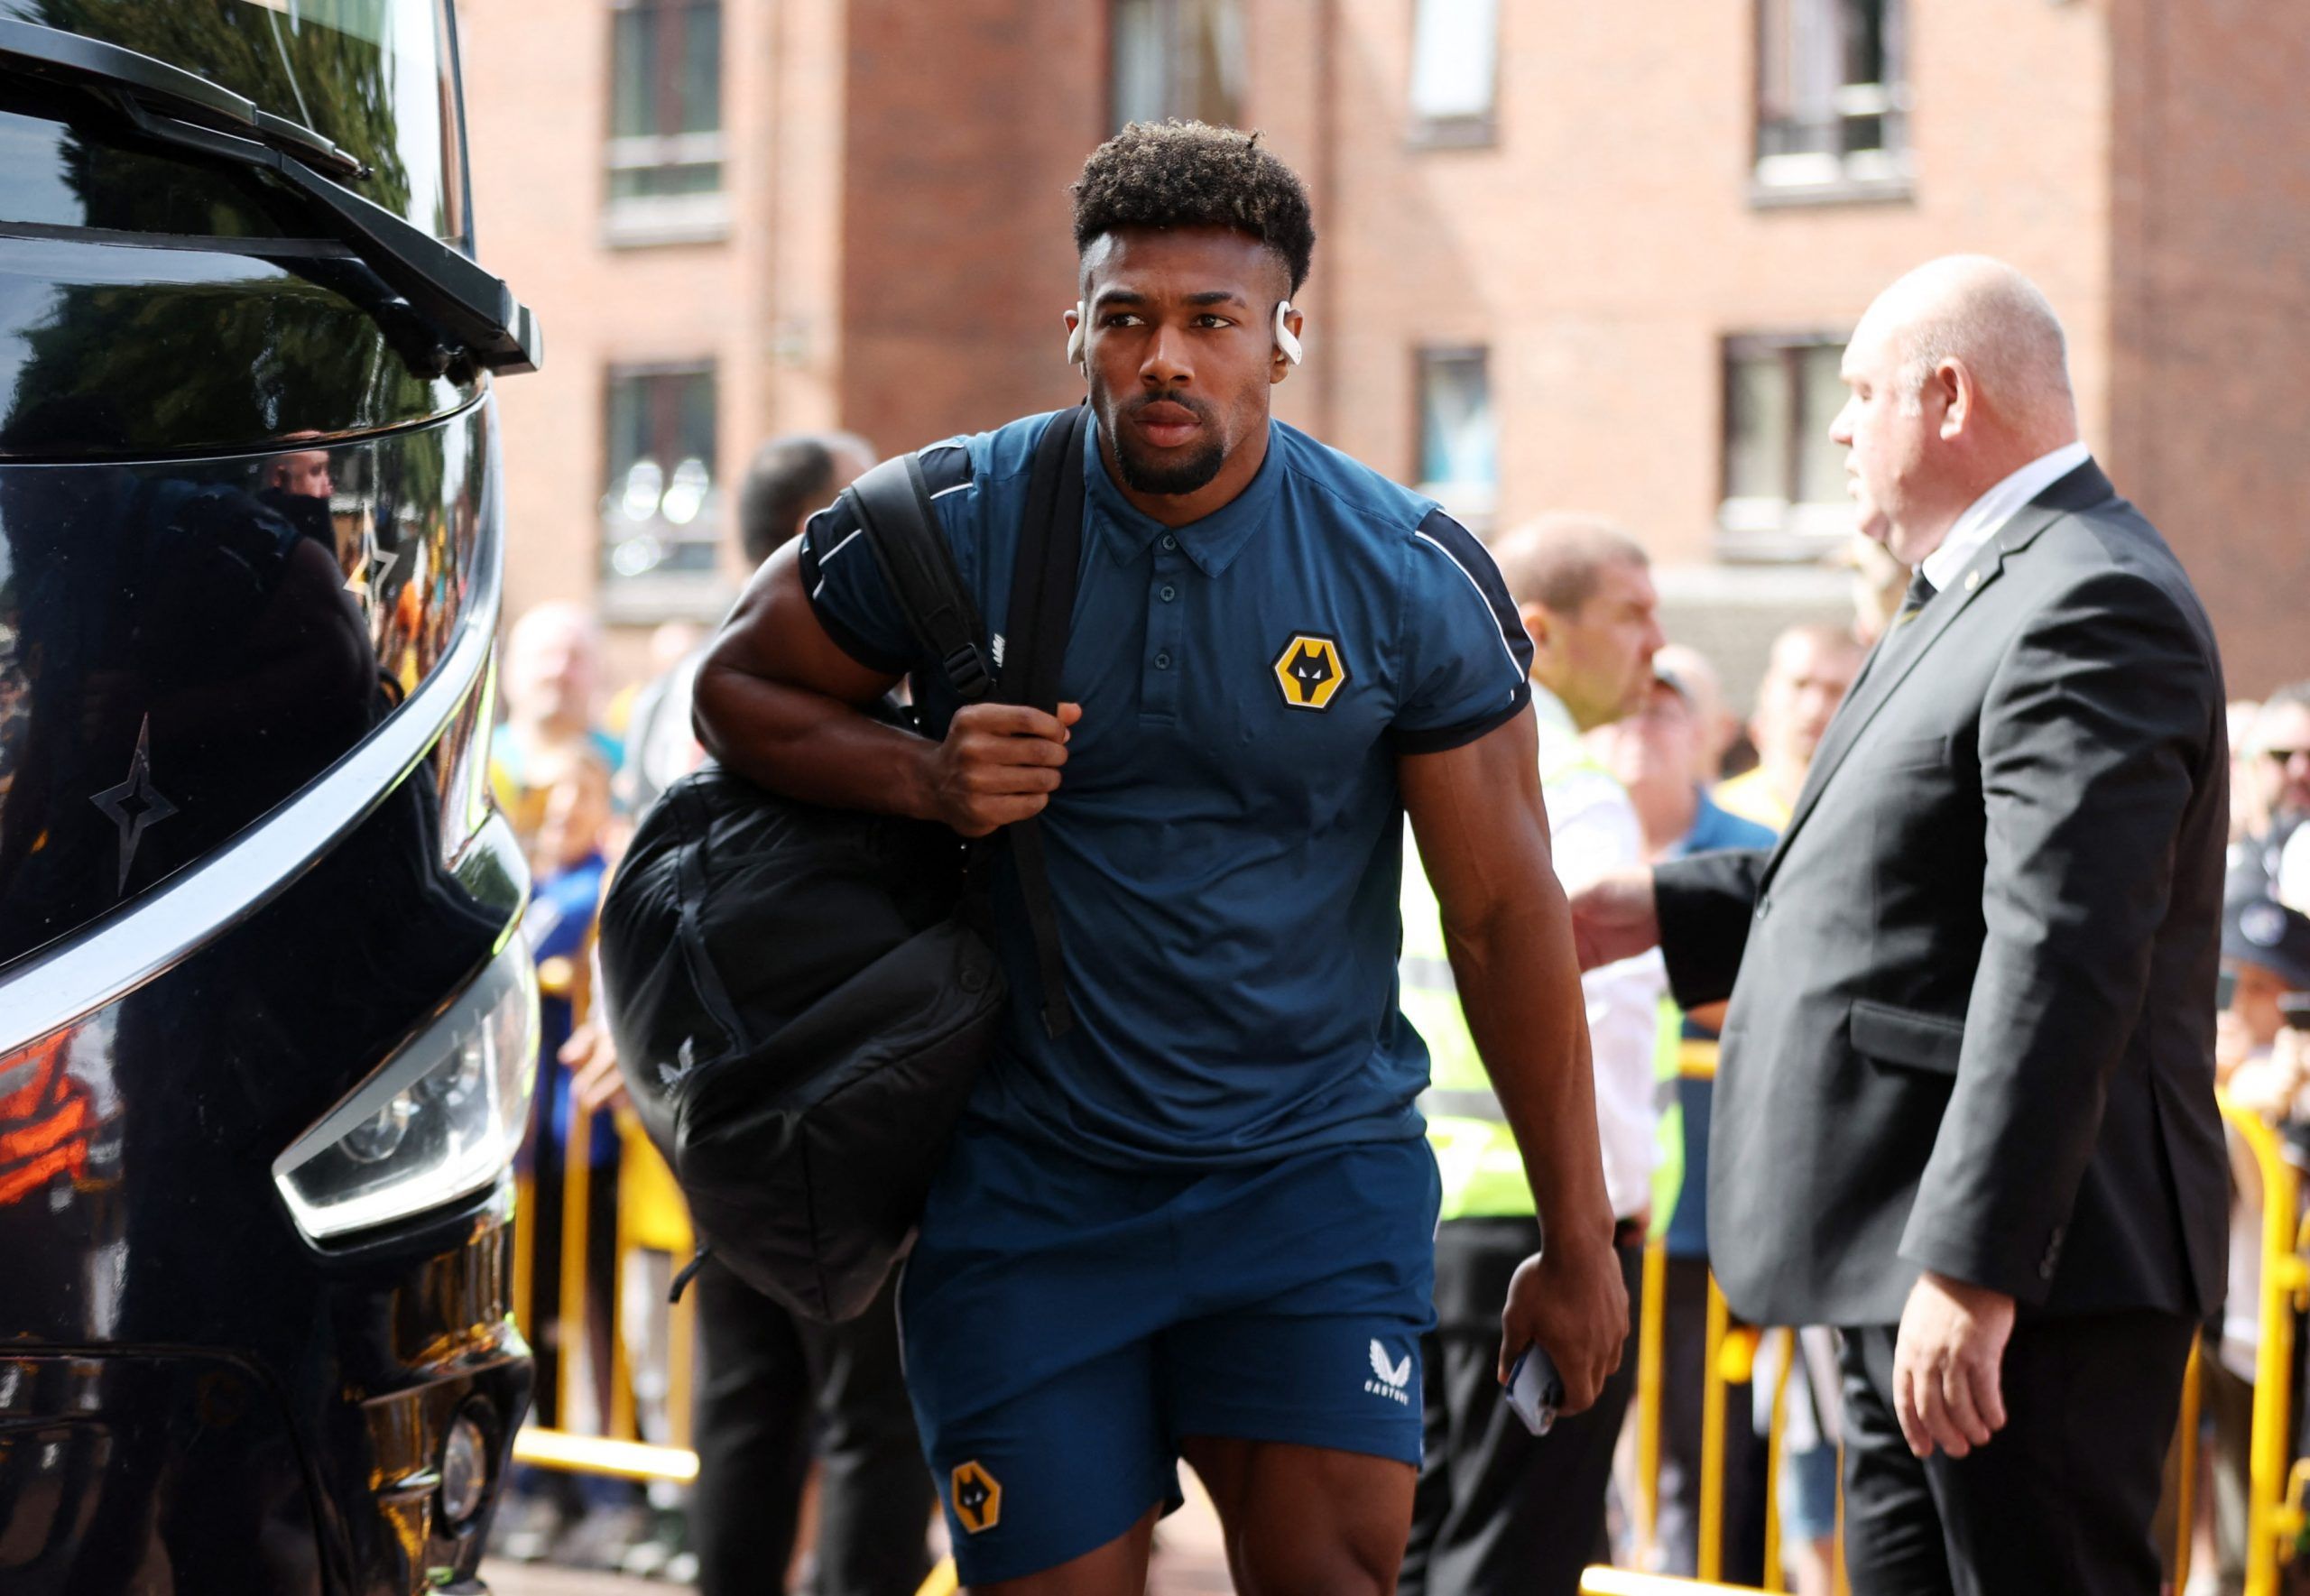 Soccer Football - Premier League - Wolverhampton Wanderers v Newcastle United - Molineux Stadium, Wolverhampton, Britain - August 28, 2022 Wolverhampton Wanderers' Adama Traore arrives for the match Action Images via Reuters/Molly Darlington EDITORIAL USE ONLY. No use with unauthorized audio, video, data, fixture lists, club/league logos or 'live' services. Online in-match use limited to 75 images, no video emulation. No use in betting, games or single club /league/player publications.  Please c